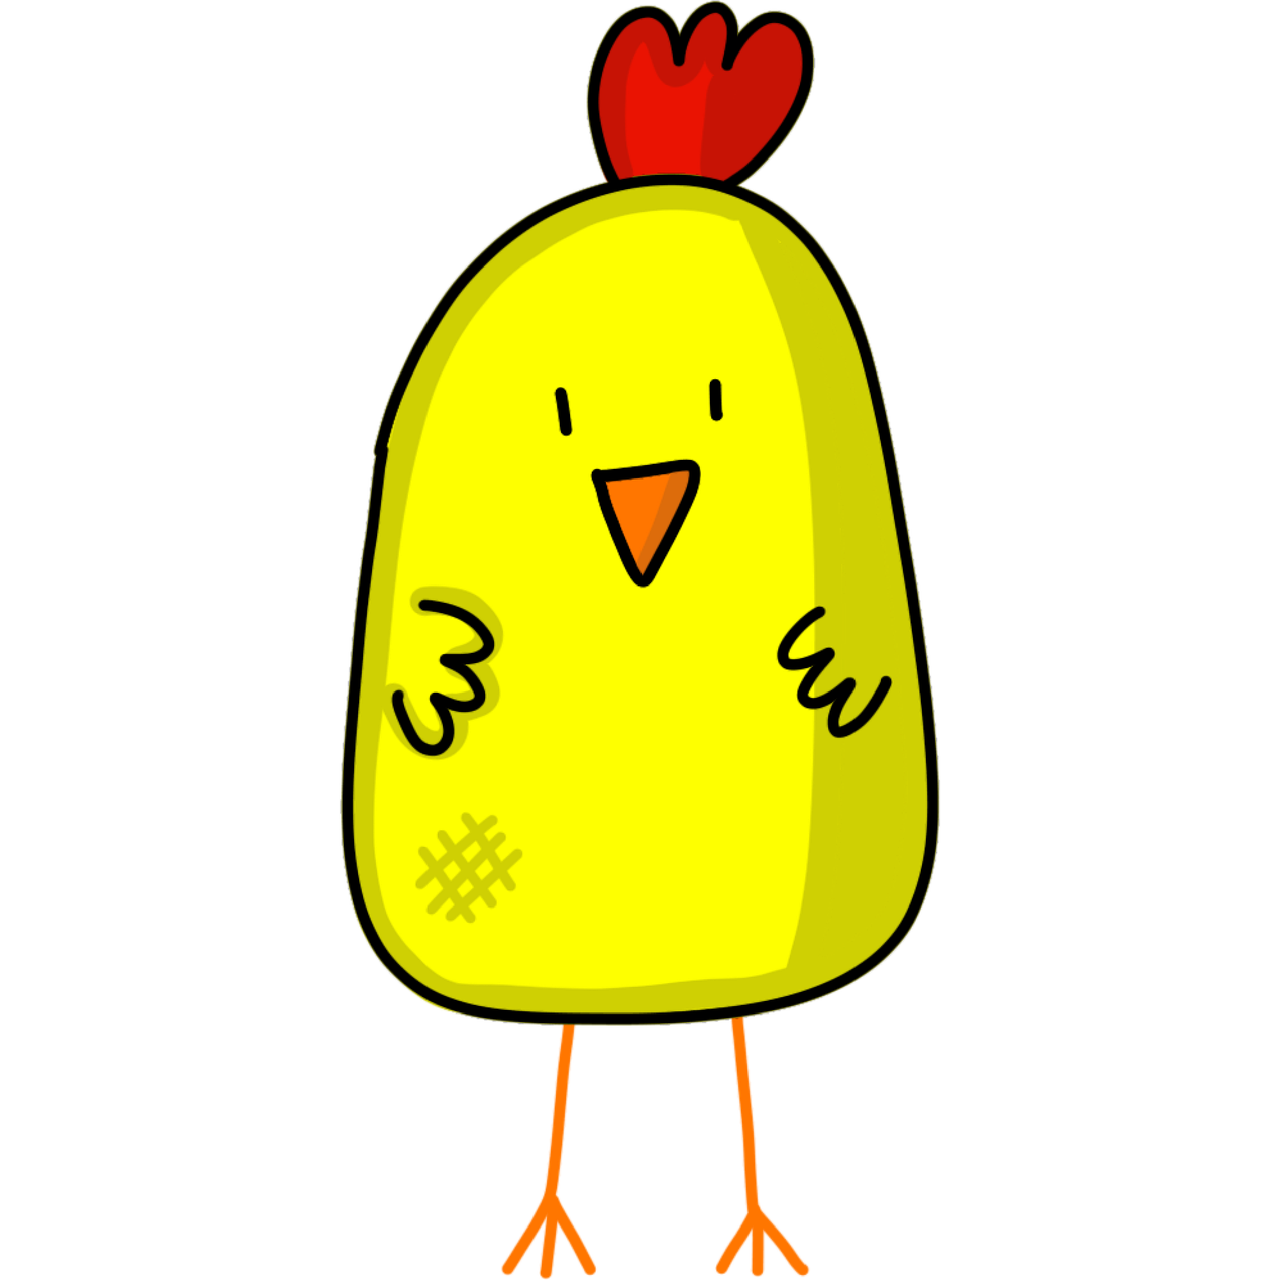 a yellow chicken with a red heart on its head, inspired by Chica Macnab, pixabay, mingei, nighttime!, soy fan de quino, lemon, meaty